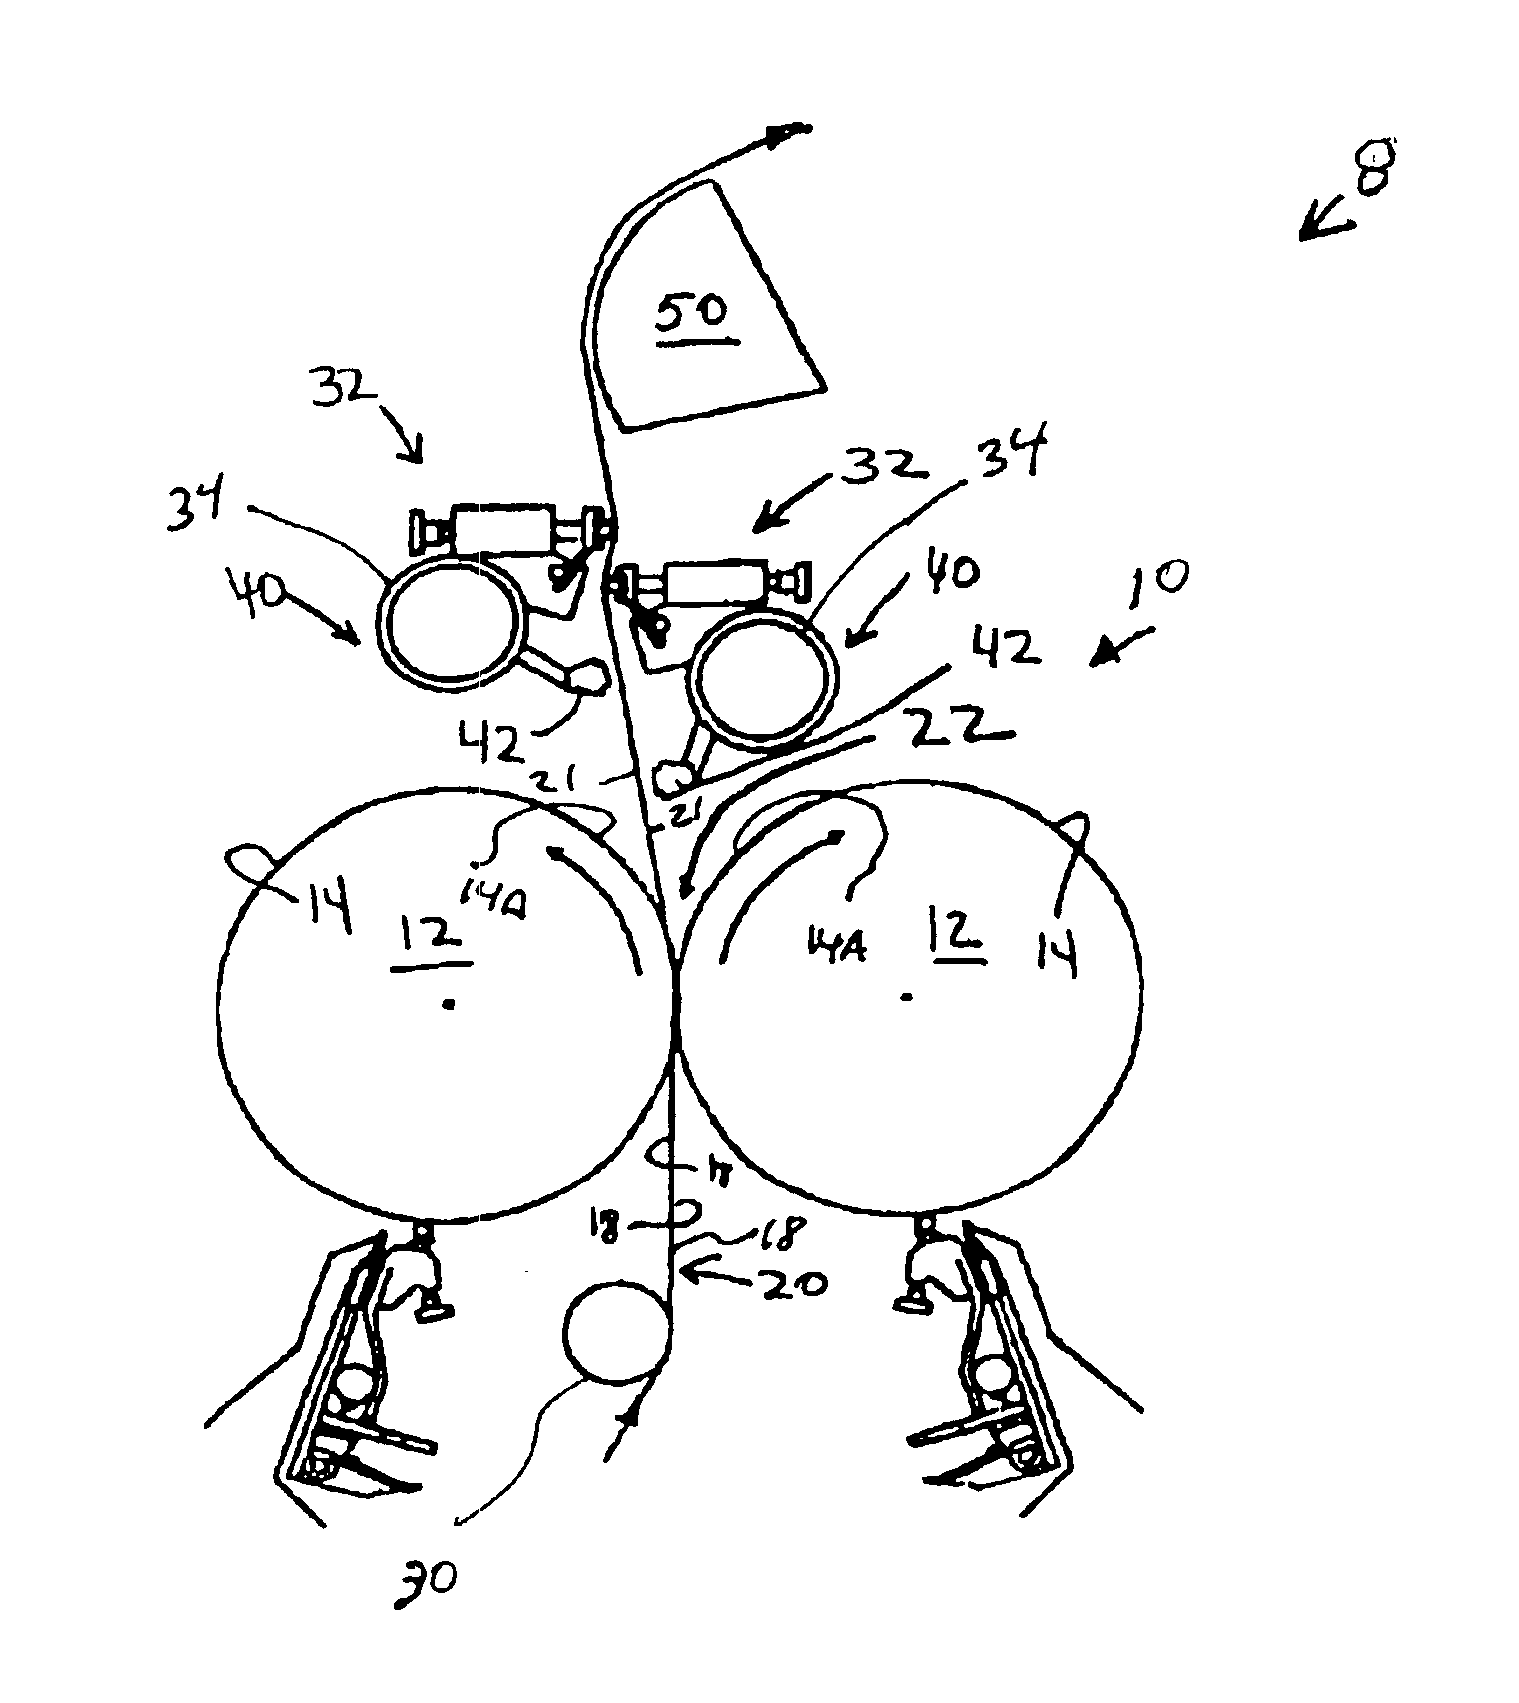 Film coater and smoothing method and apparatus